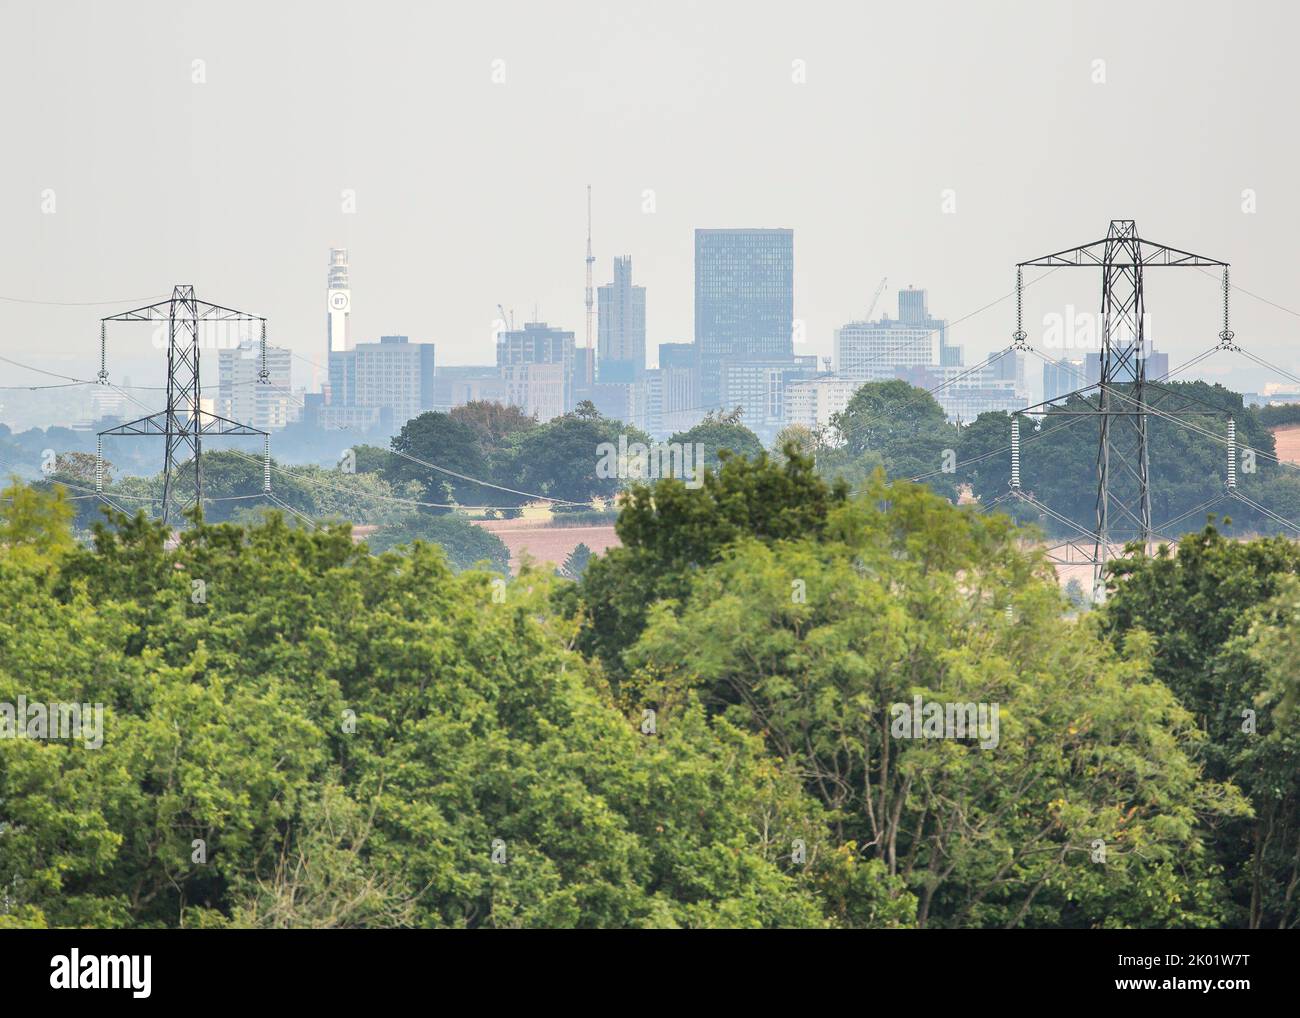 Powerlines feeding electricity to the City of Birmingham, UK. The cityscape beyond the powerlines shows the famous BT tower in the city centre. Stock Photo